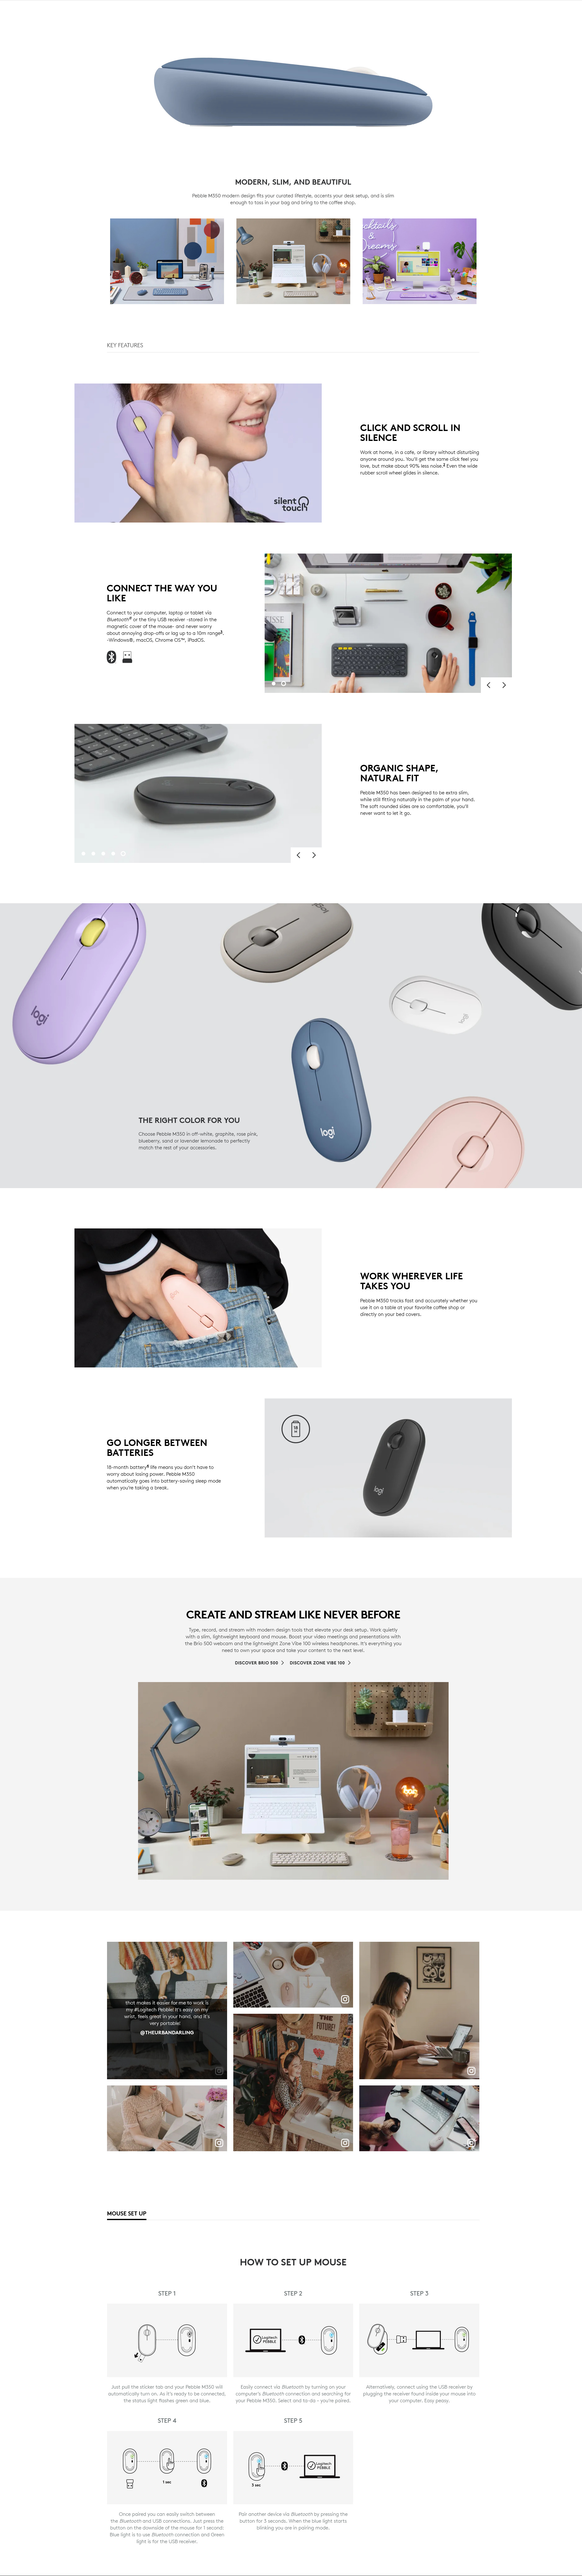 A large marketing image providing additional information about the product Logitech Pebble M350 Wireless Mouse - Blueberry - Additional alt info not provided